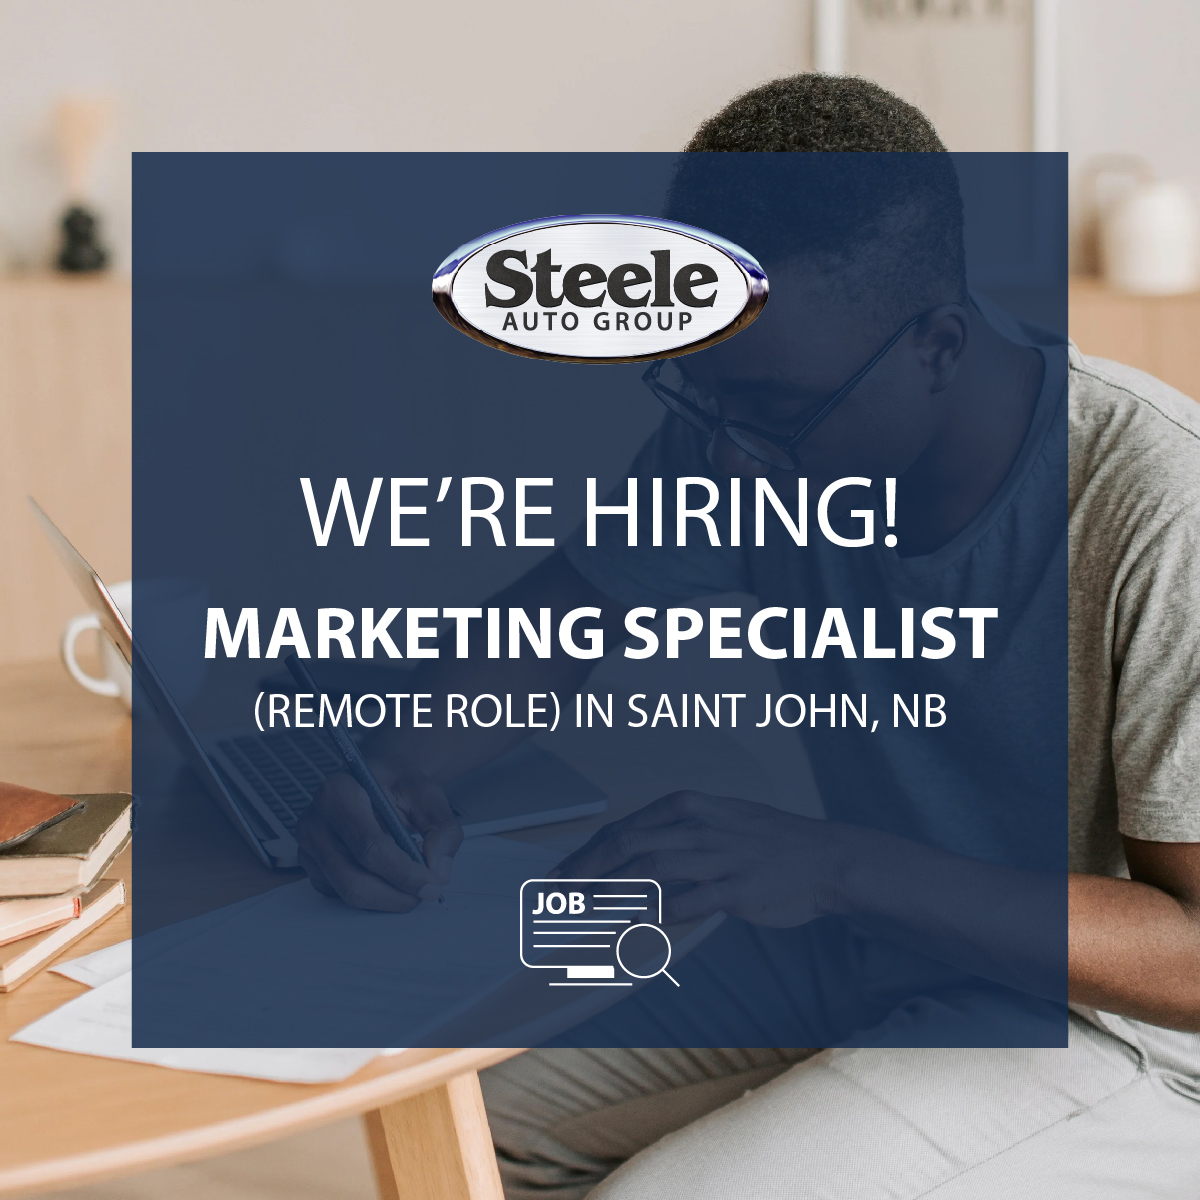 We're hiring  a Marketing Specialist! Join our growing team at Steele Auto Group in Saint John, New Brunswick! 

Apply now: bit.ly/3UkBYSX

#automotiveindustry #marketing #careeropportunity #steelecareers